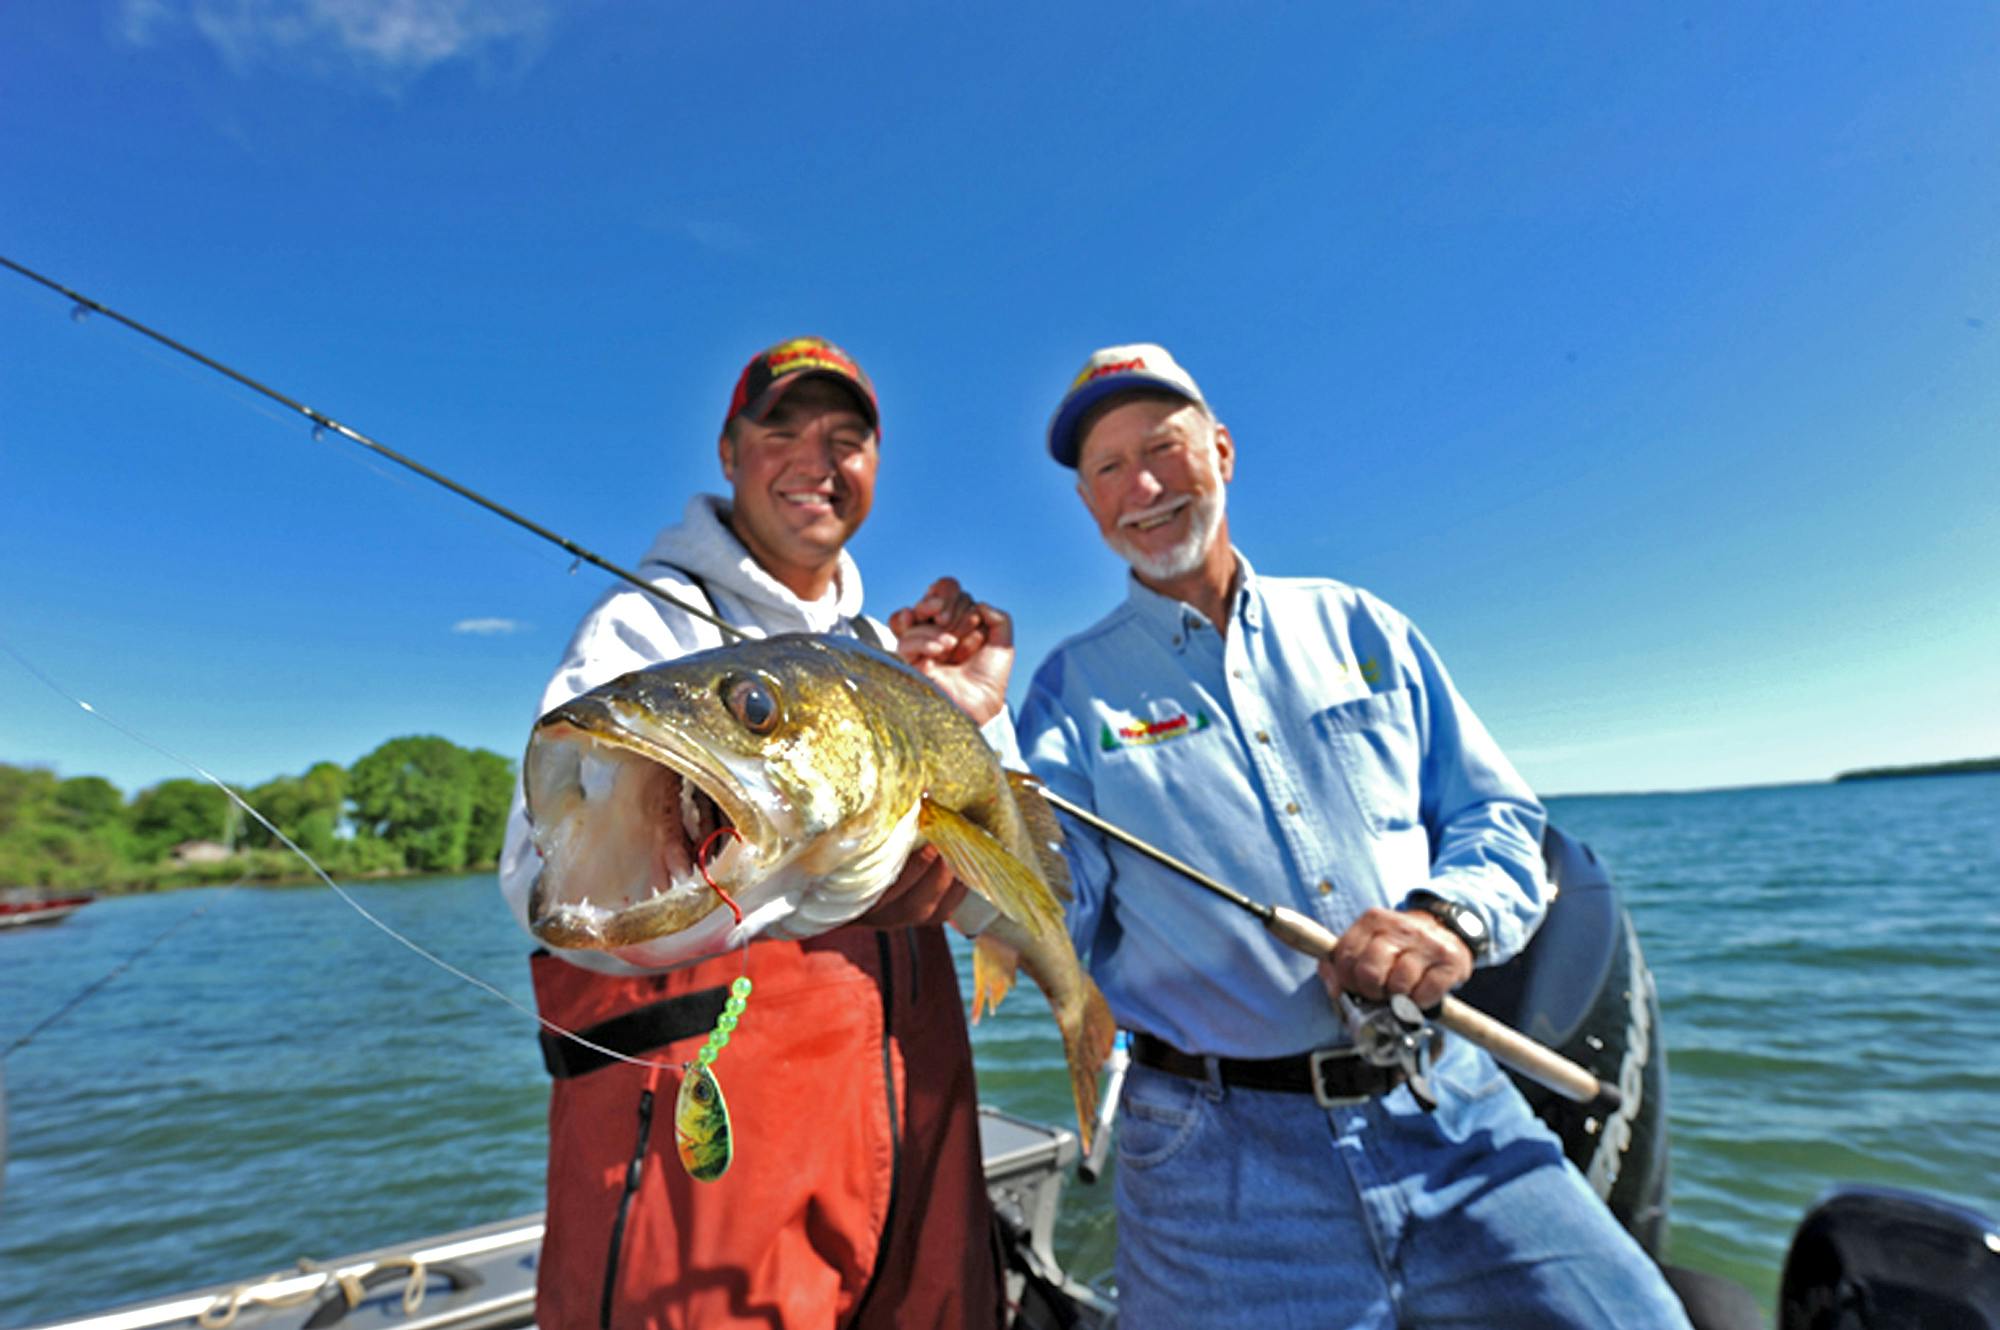 Anderson: For Roaches, fishing is a family affair